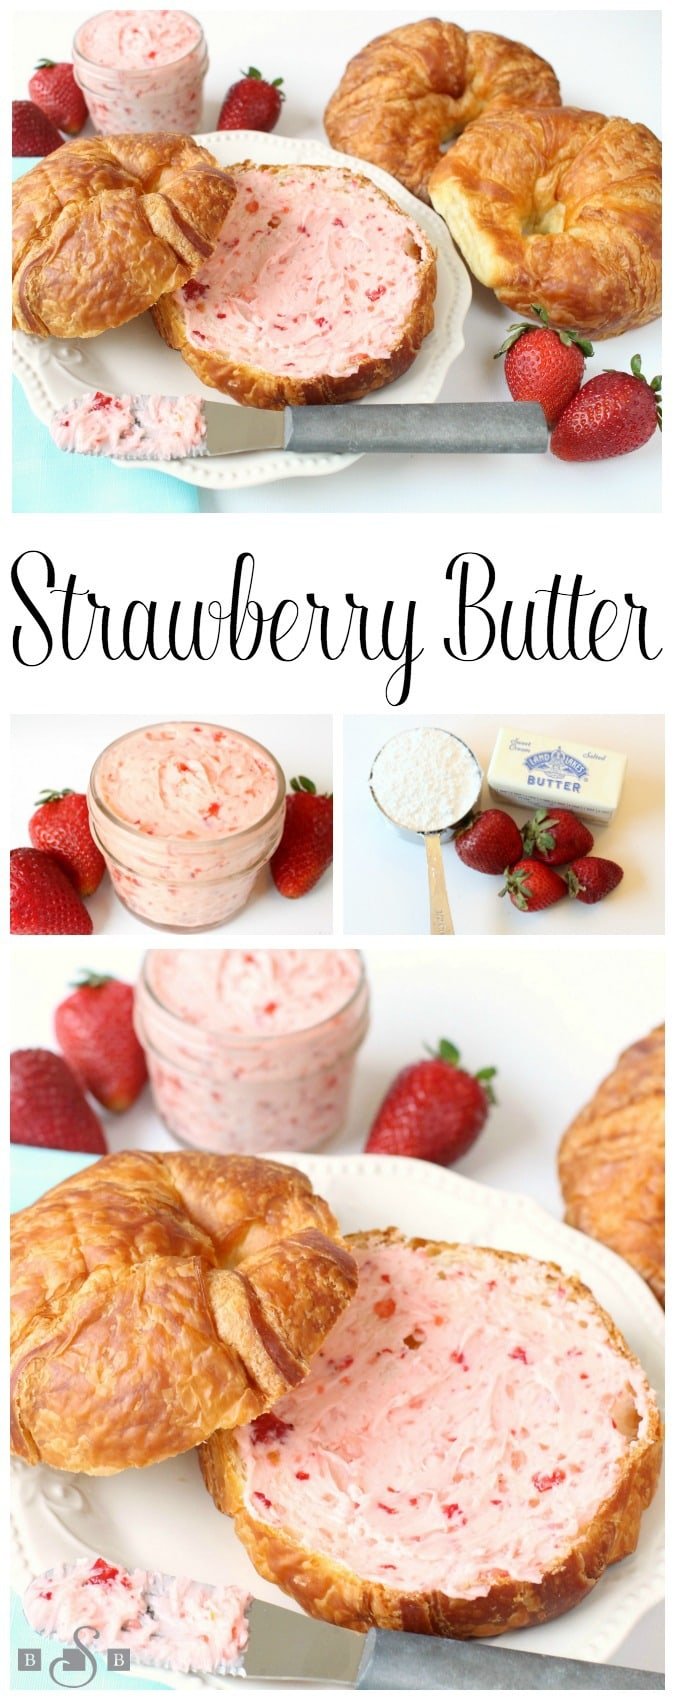 Strawberry Butter is a simple and delicious fresh fruit spread recipe that's great on biscuits, rolls and toast! Just 3 ingredients and only 5 minutes to make this amazing strawberry butter recipe.